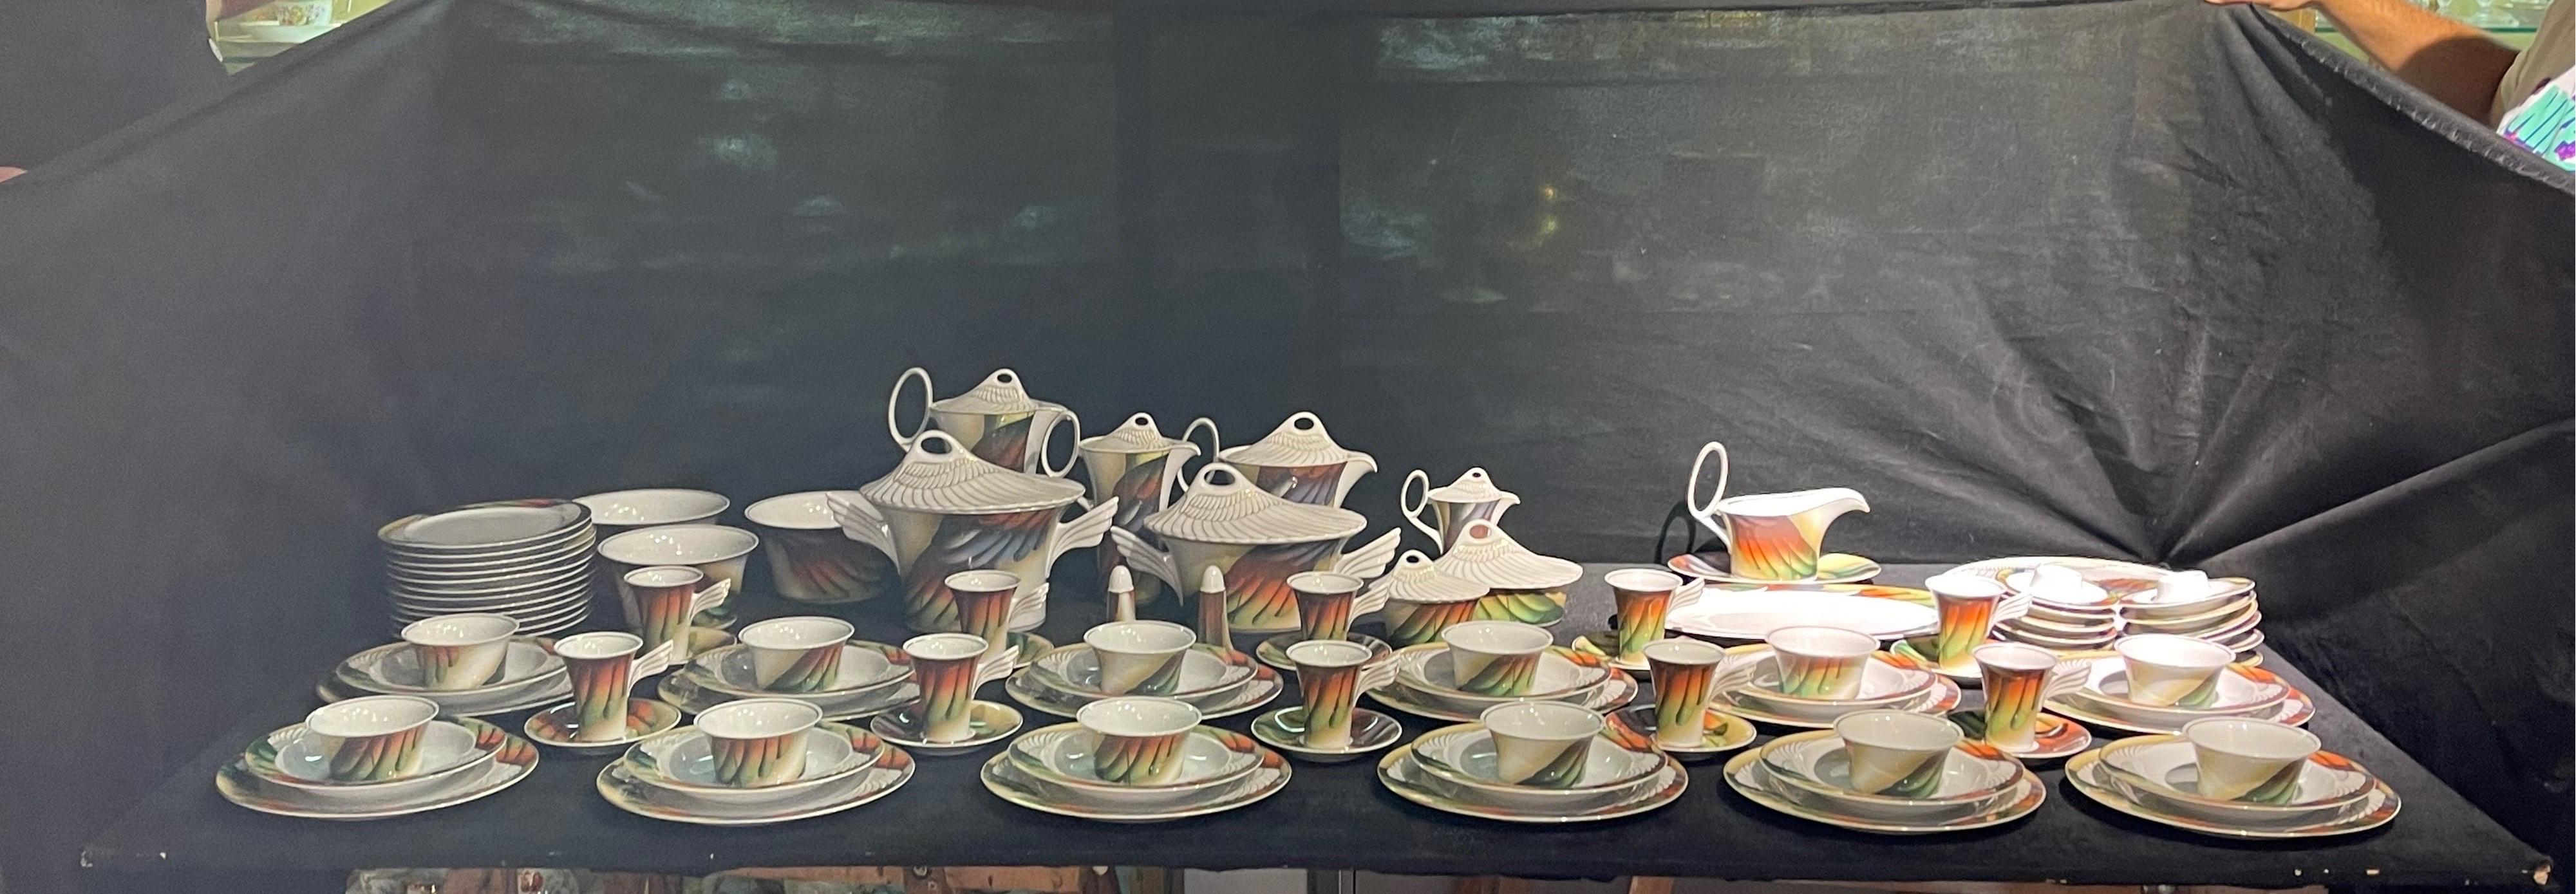 Extensive Rosenthal Porzellan Serivce Mythos by Paul Wunderlich

Very extensive porcelain service from Rosenthal, designed by Paul Wunderlich. The porcelain service consists of many rare parts such as serving plates, gravy boats, tureens, jugs and